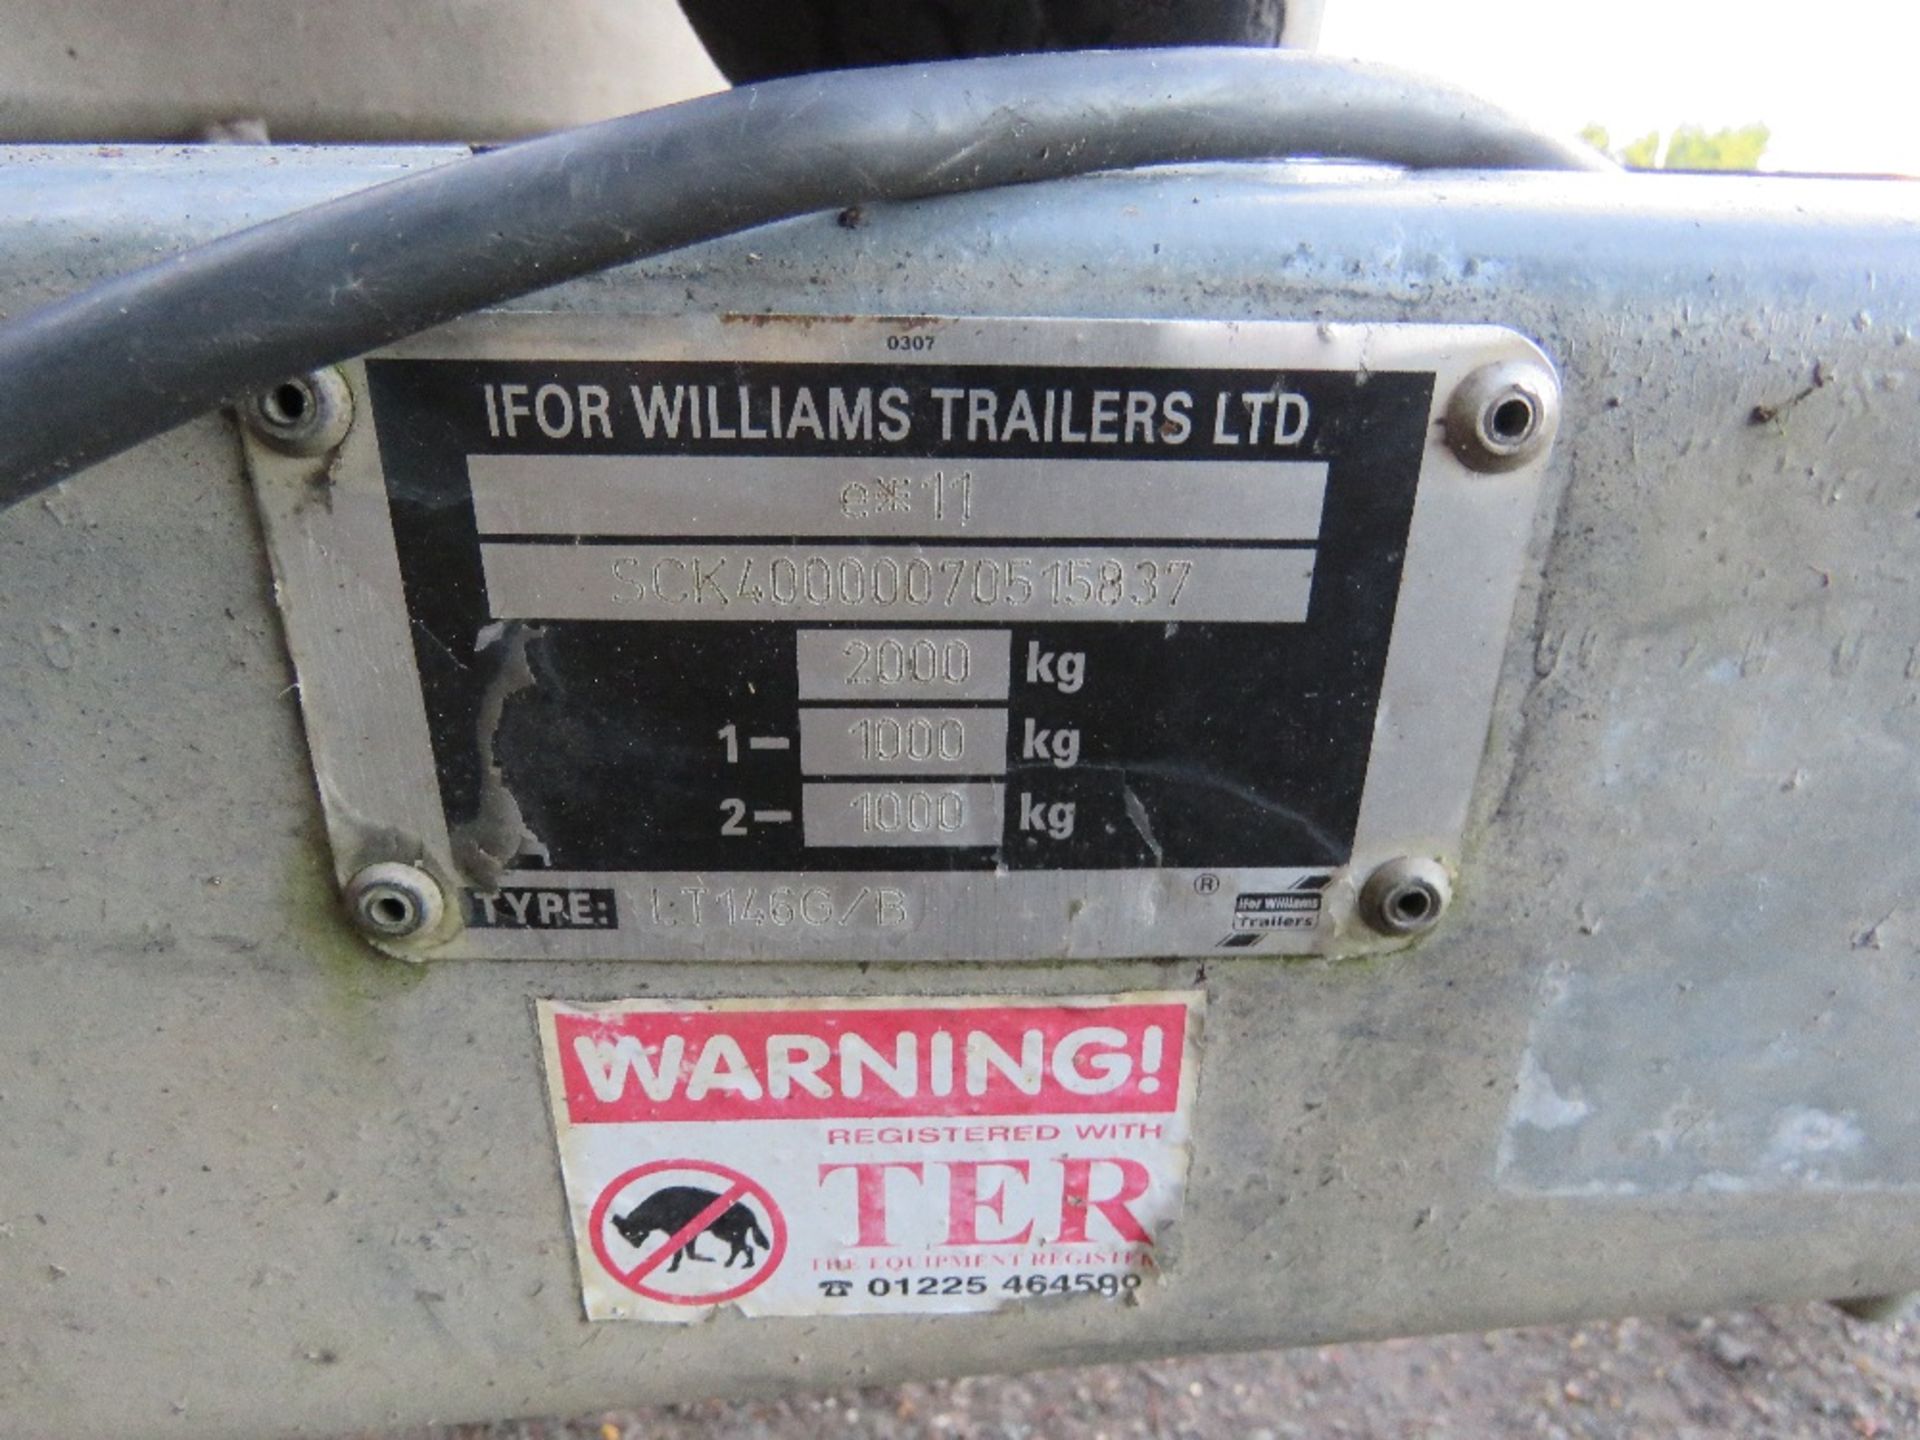 IFOR WILLIAMS LT146G BEAVER TAILED TWIN AXLE PLANT TRAILER. SN:SCK40000070515837. PREVIOUS COUNCIL U - Image 2 of 4